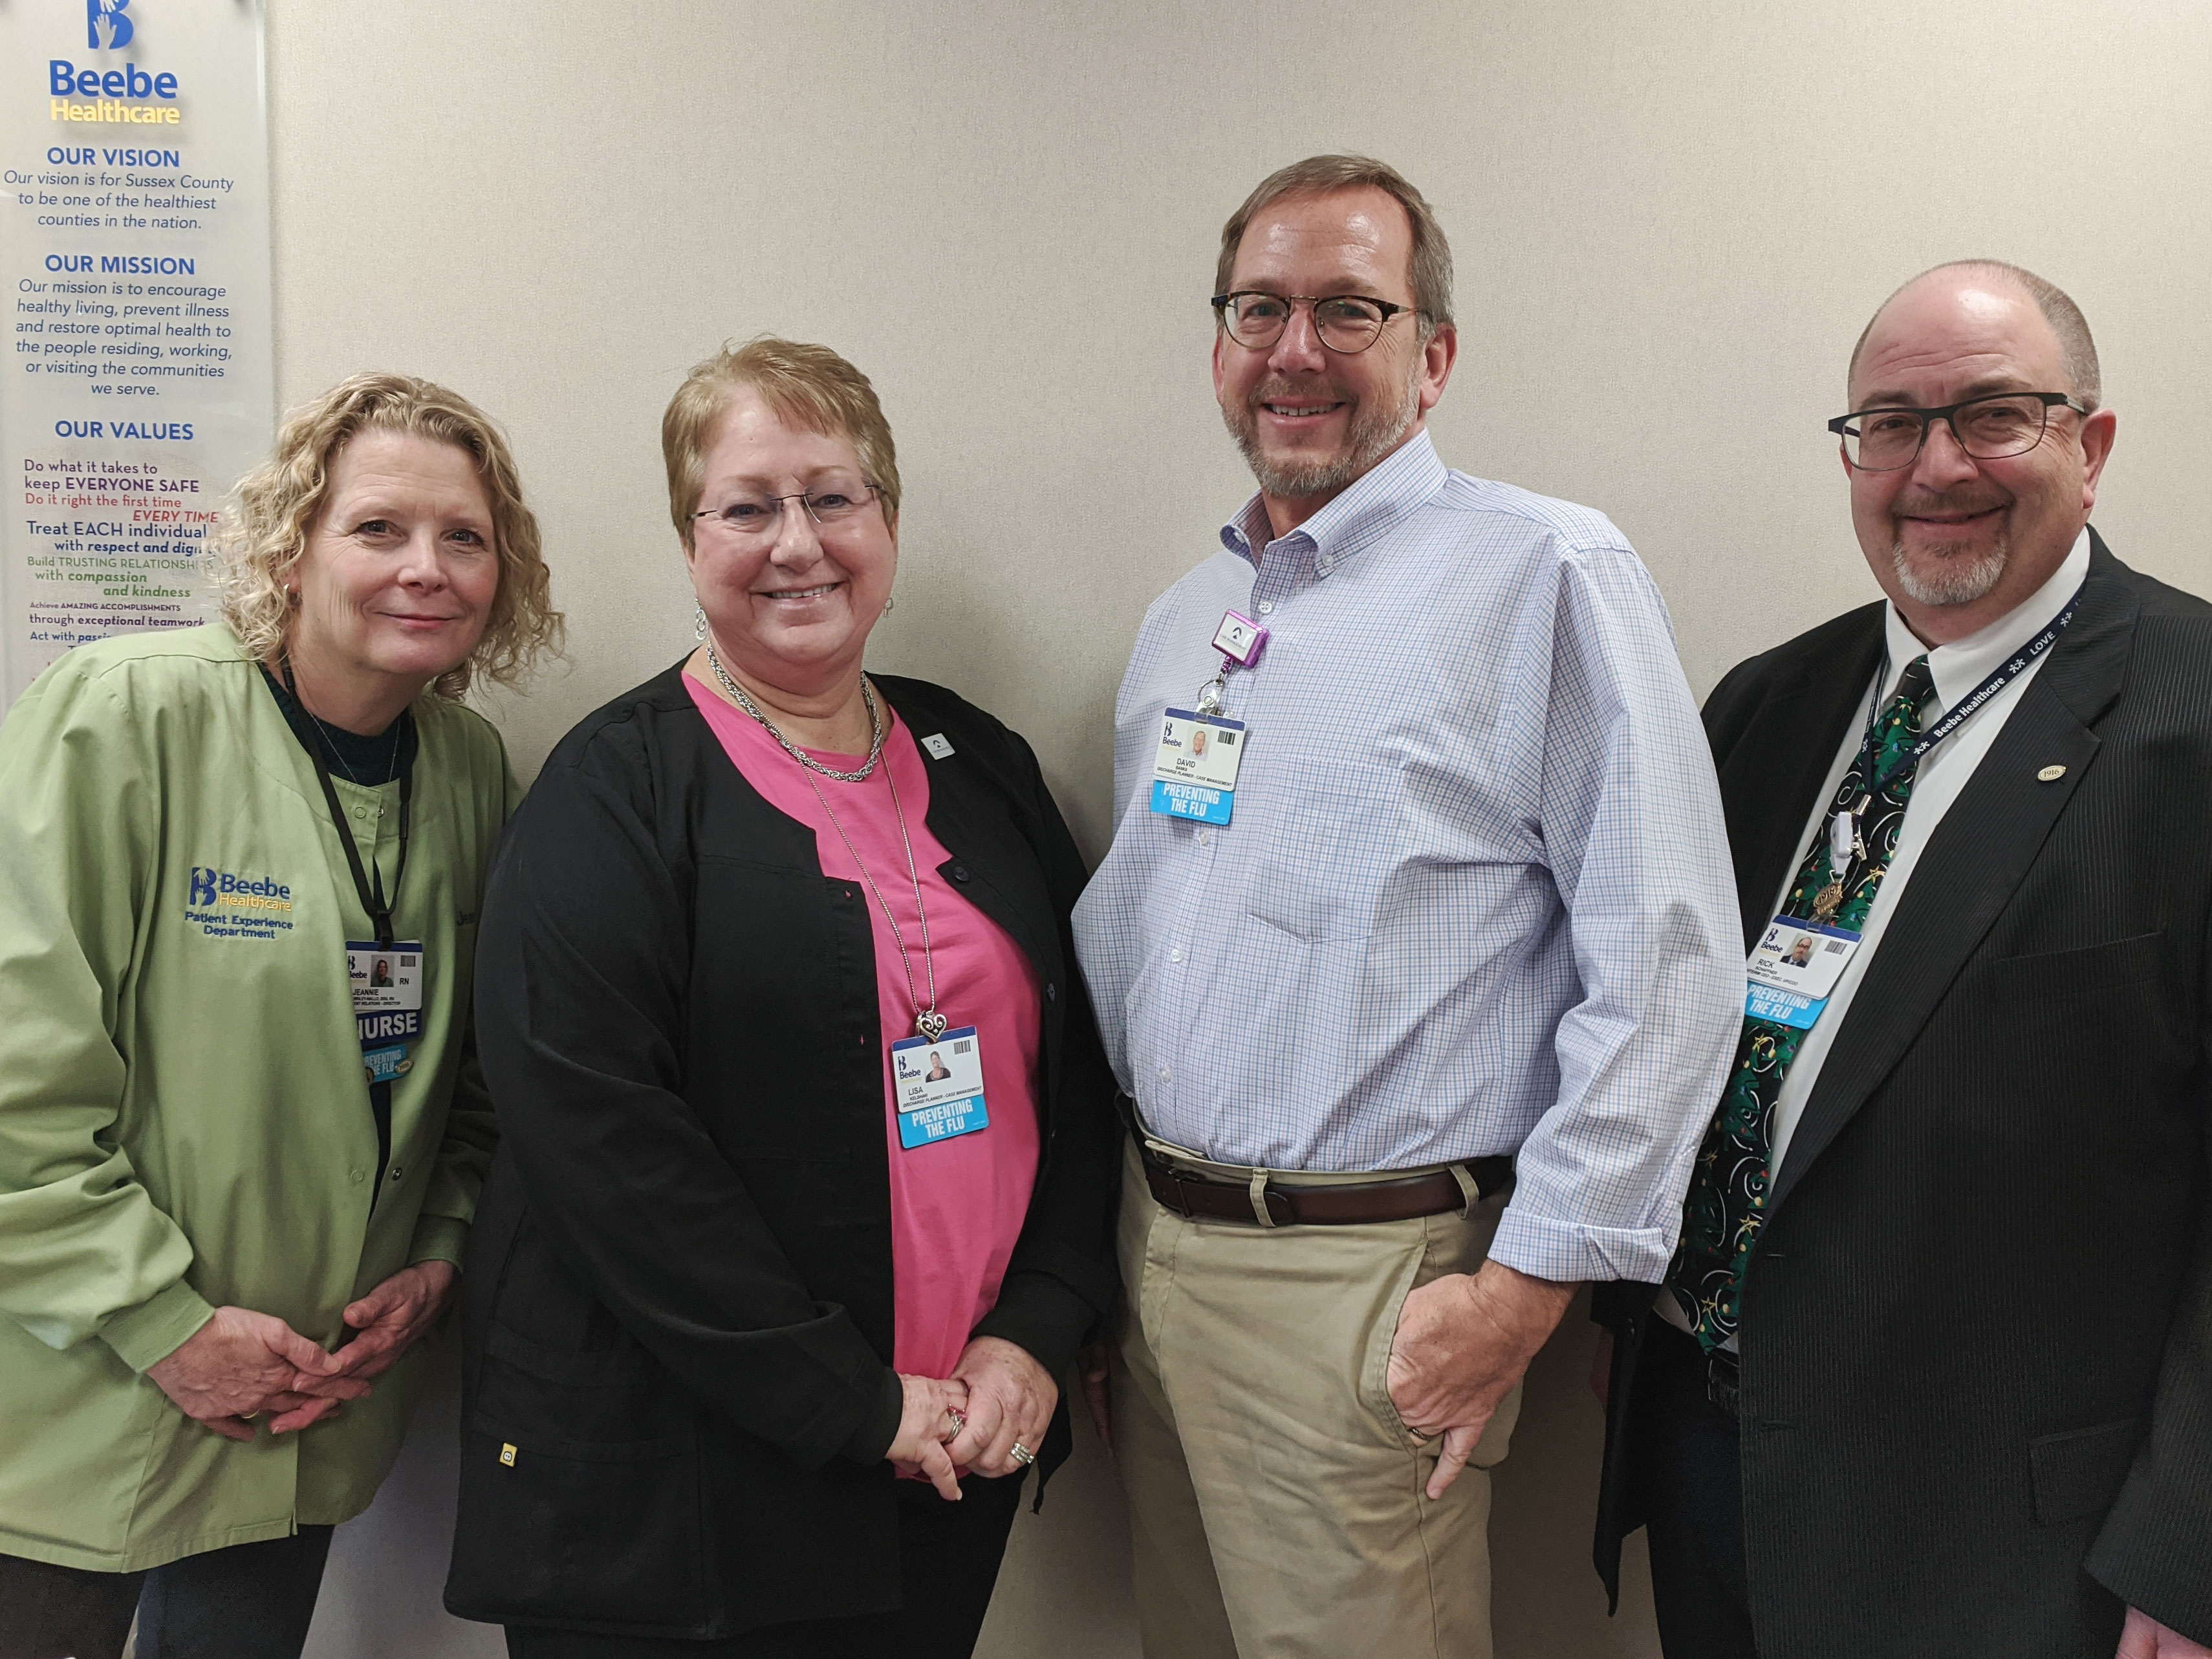 David Banks (second from right), Discharge Planner at Beebe Healthcare, is the recipient of Beebe’s December L.O.V.E. Letter. Also pictured from left to right are Jeannie Wallo, Director of Patient Experience, Lisa Kelshaw, Discharge Planners, and Rick Sc